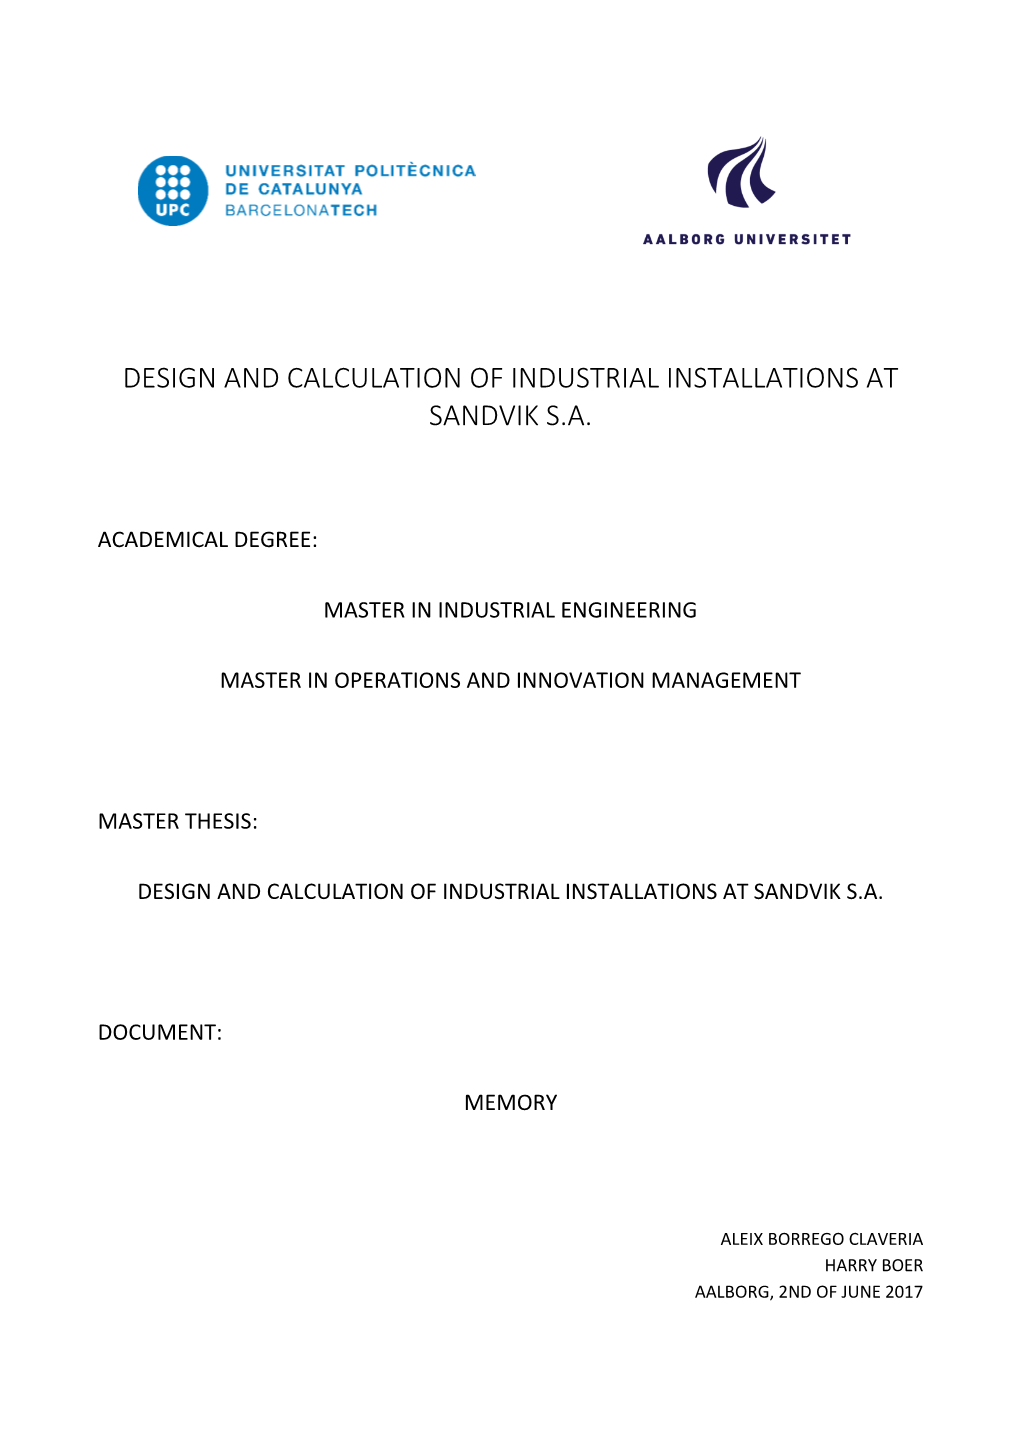 Design and Calculation of Industrial Installations at Sandvik S.A